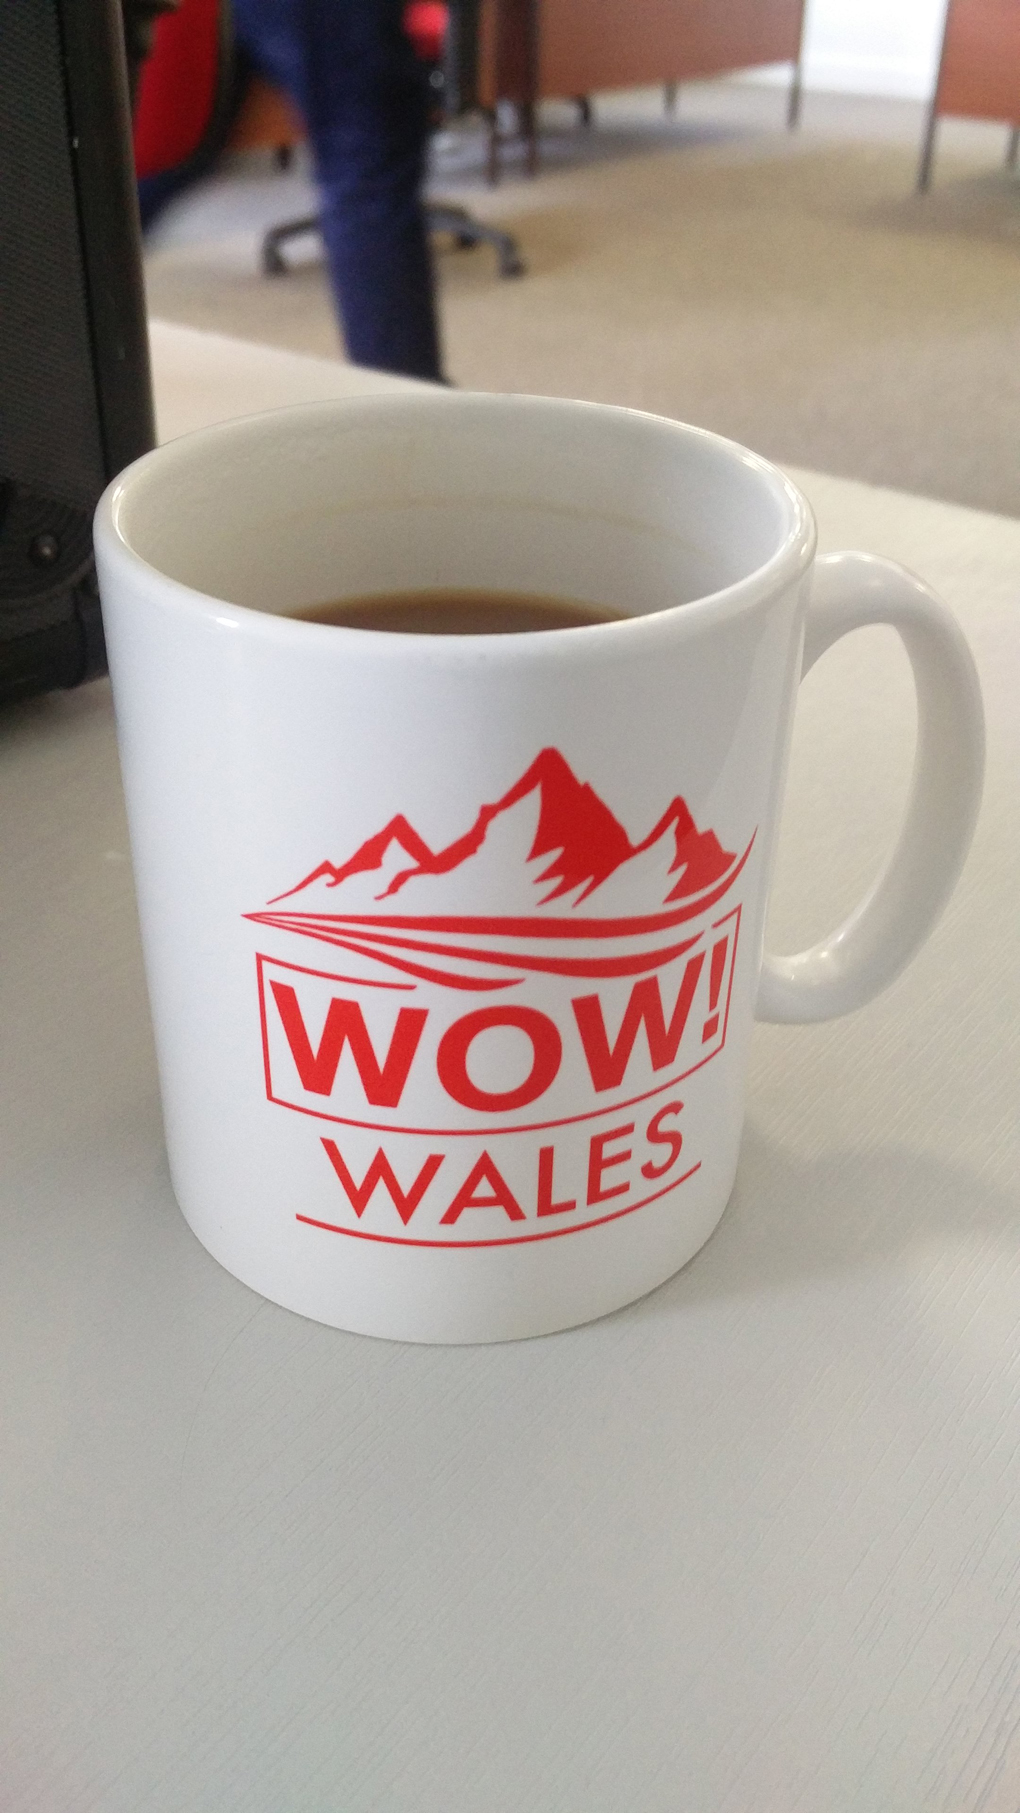 white mug with 'Wow! Wales!' printed on it in red